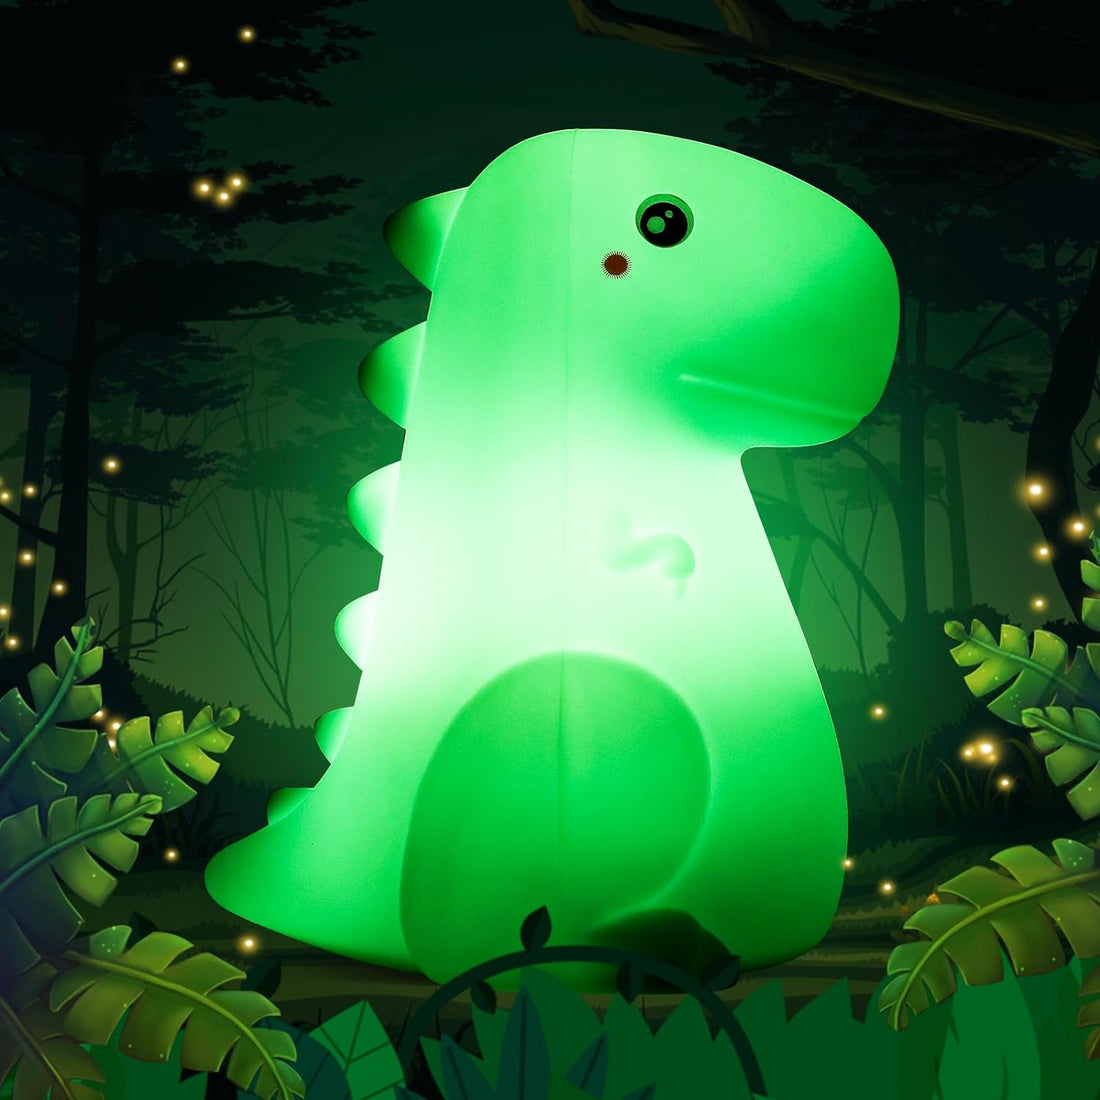 SANKEDOU Dinosaur Night Light for Kids, Touch Sensor Silicone 7 Colors Changing Room Decor for Boys Girls Light, Rechargeable Baby Mood Light Dinosaur Lamp, Cute Bedside Lamp Dinosaur Gifts (Green)